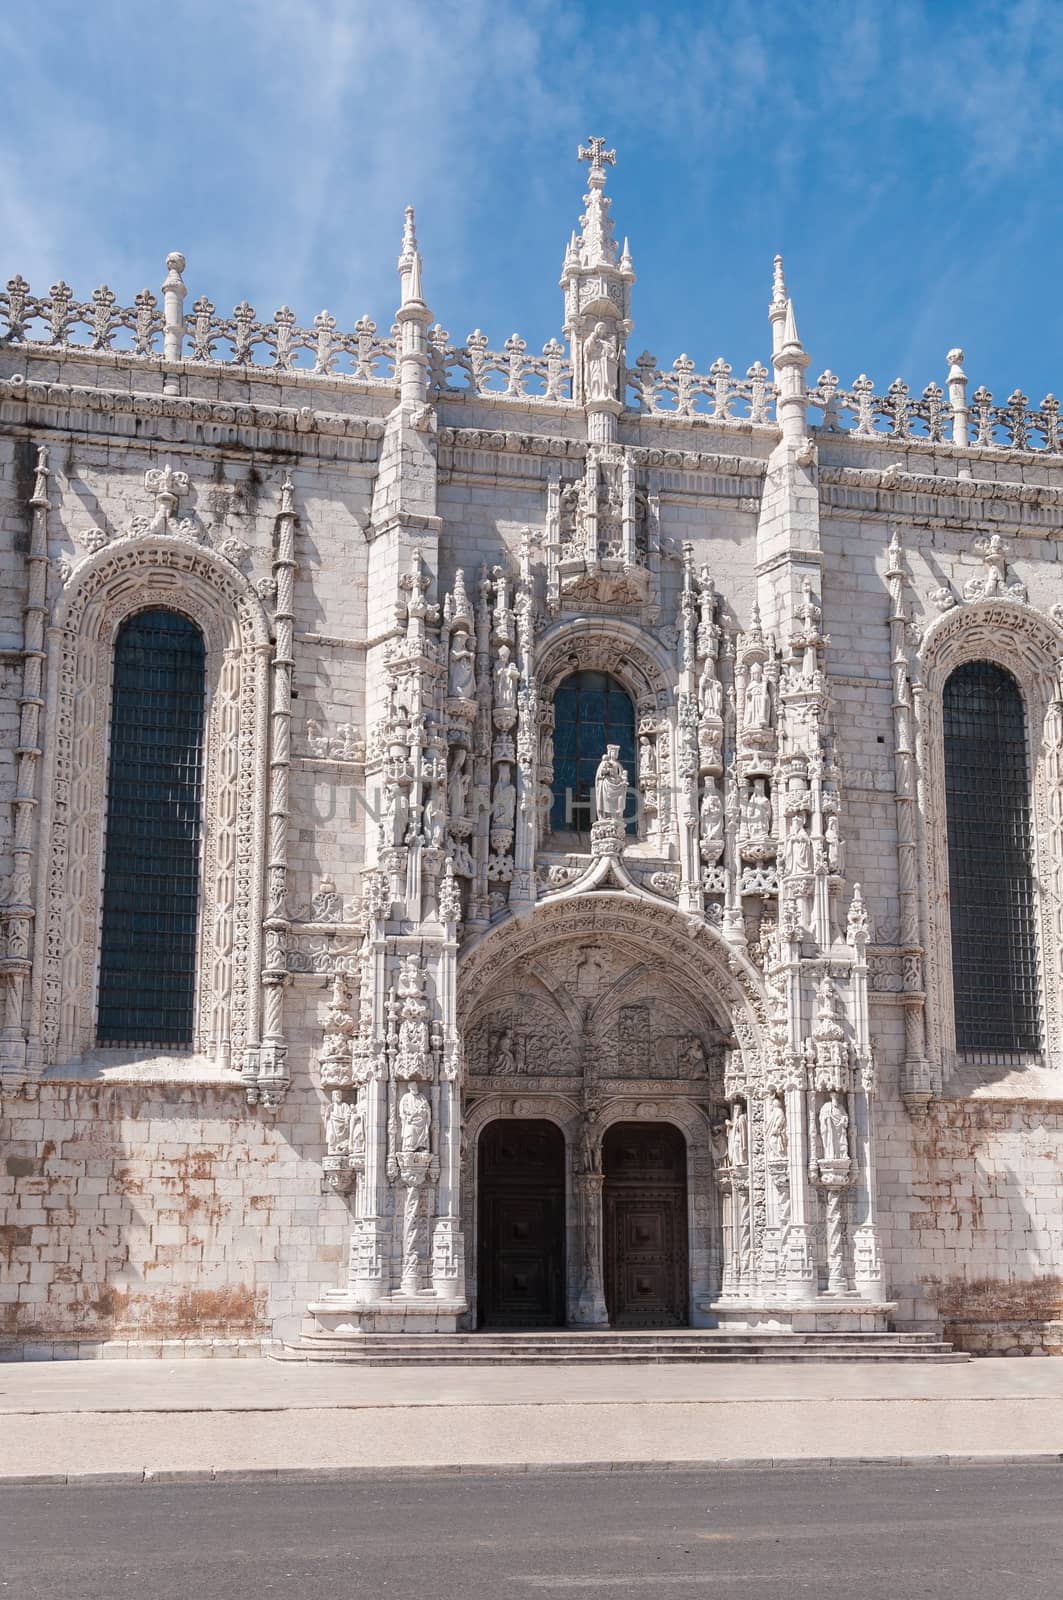 Architectural details of the main entrance of the Monastery of Jeronimos, Lisbon, Portugal